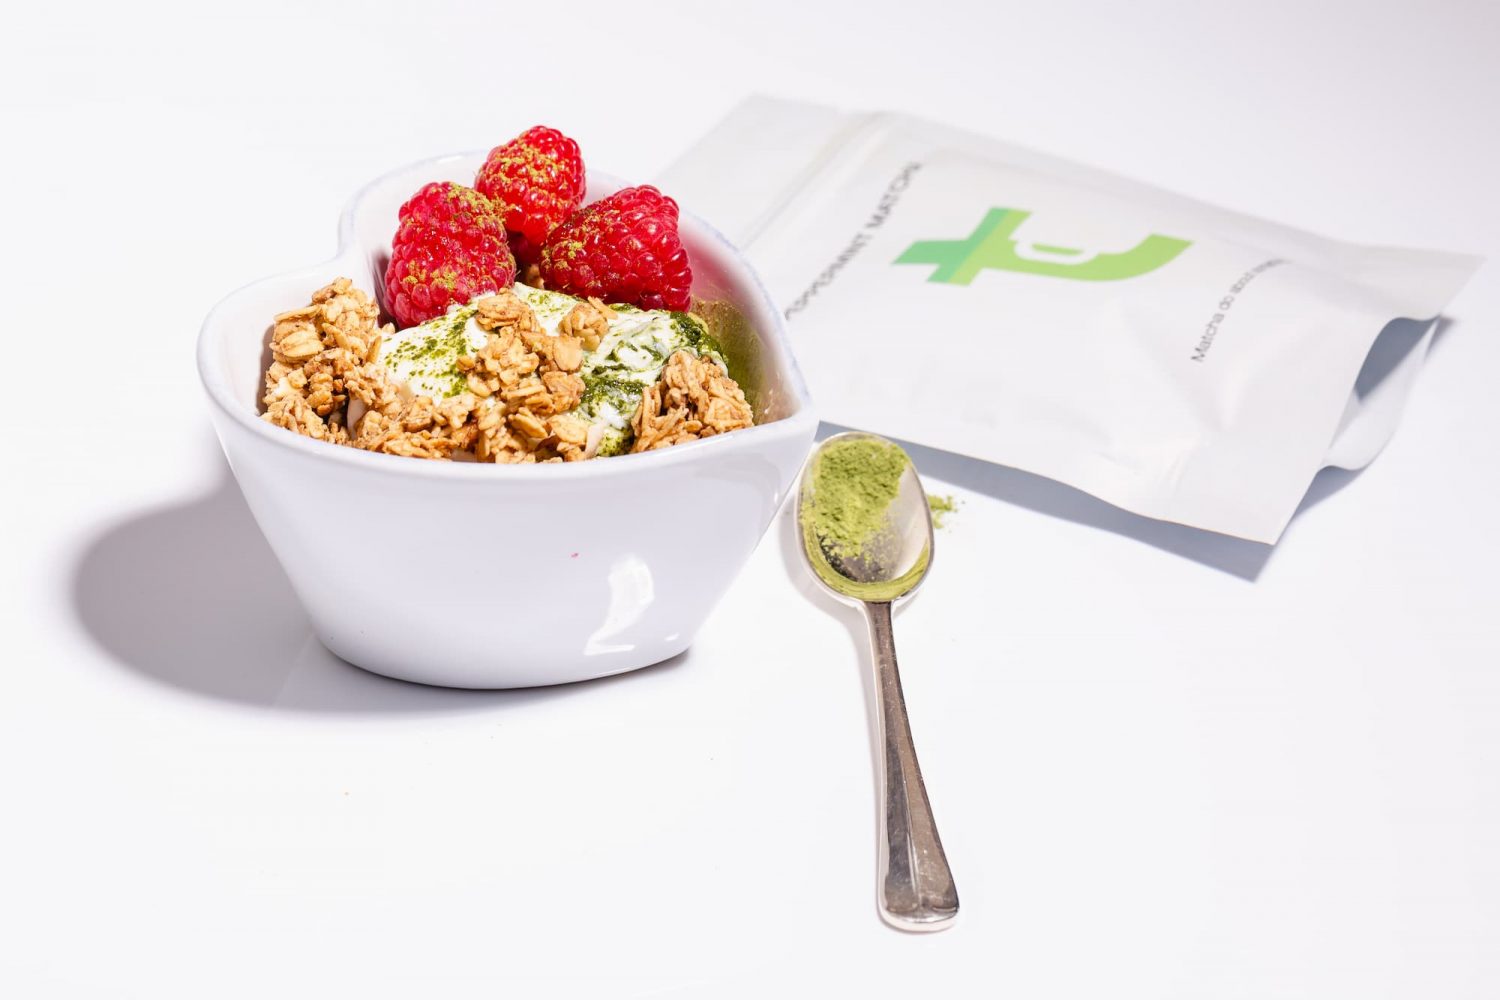 A breakfast bowl with a sachet of Twist Teas matcha next to it, showing the may ways one can incorporate matcha into their food and drinks for a lovely experience.